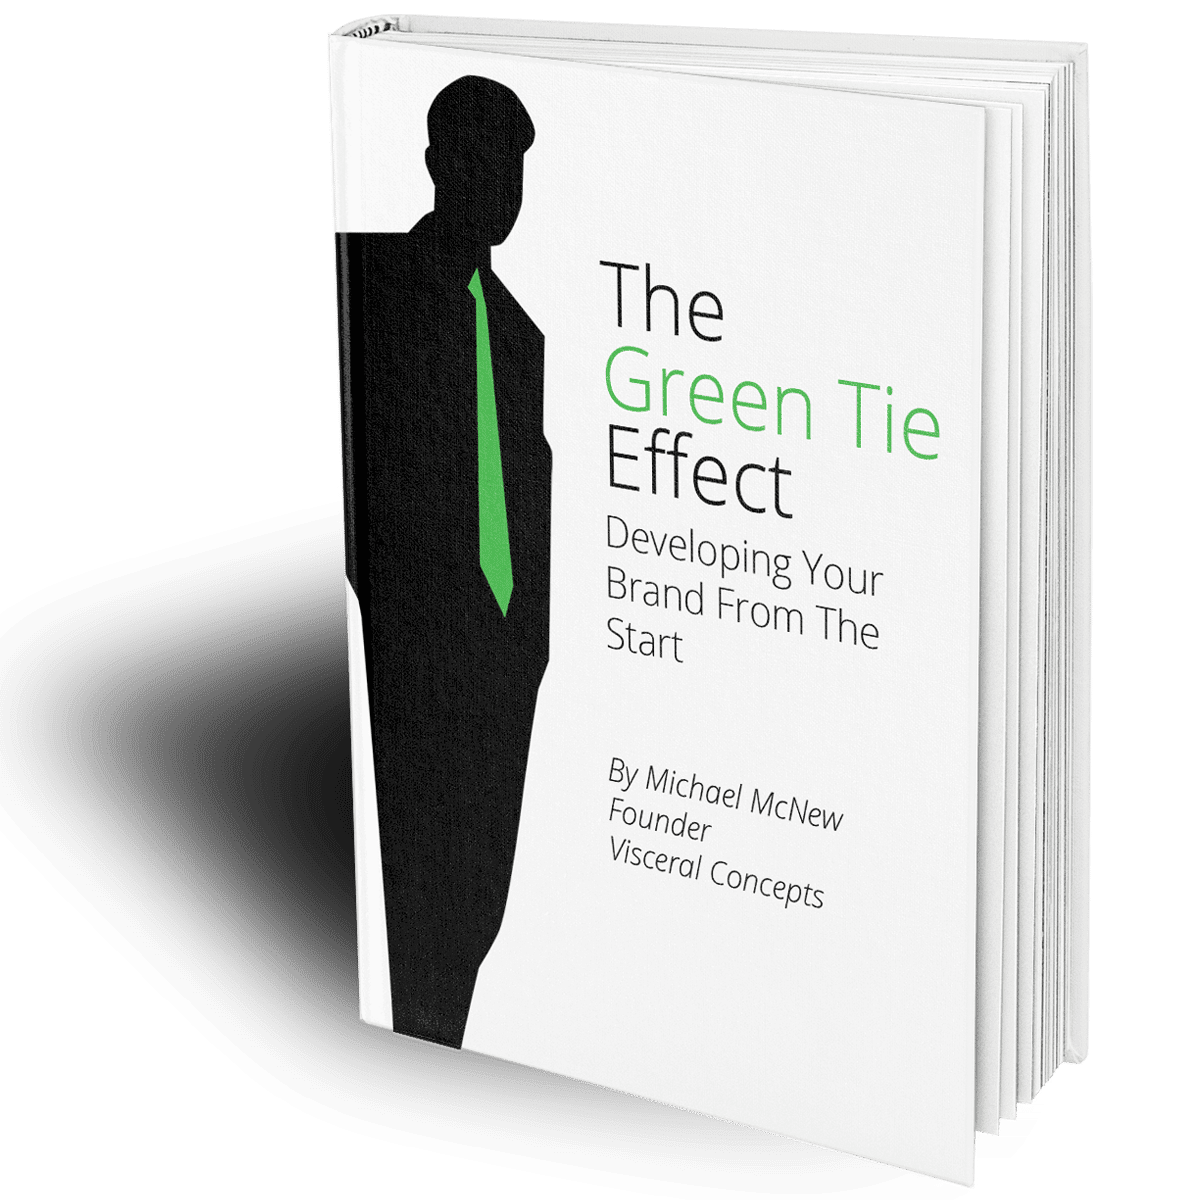 Download The Green Tie Effect Now!